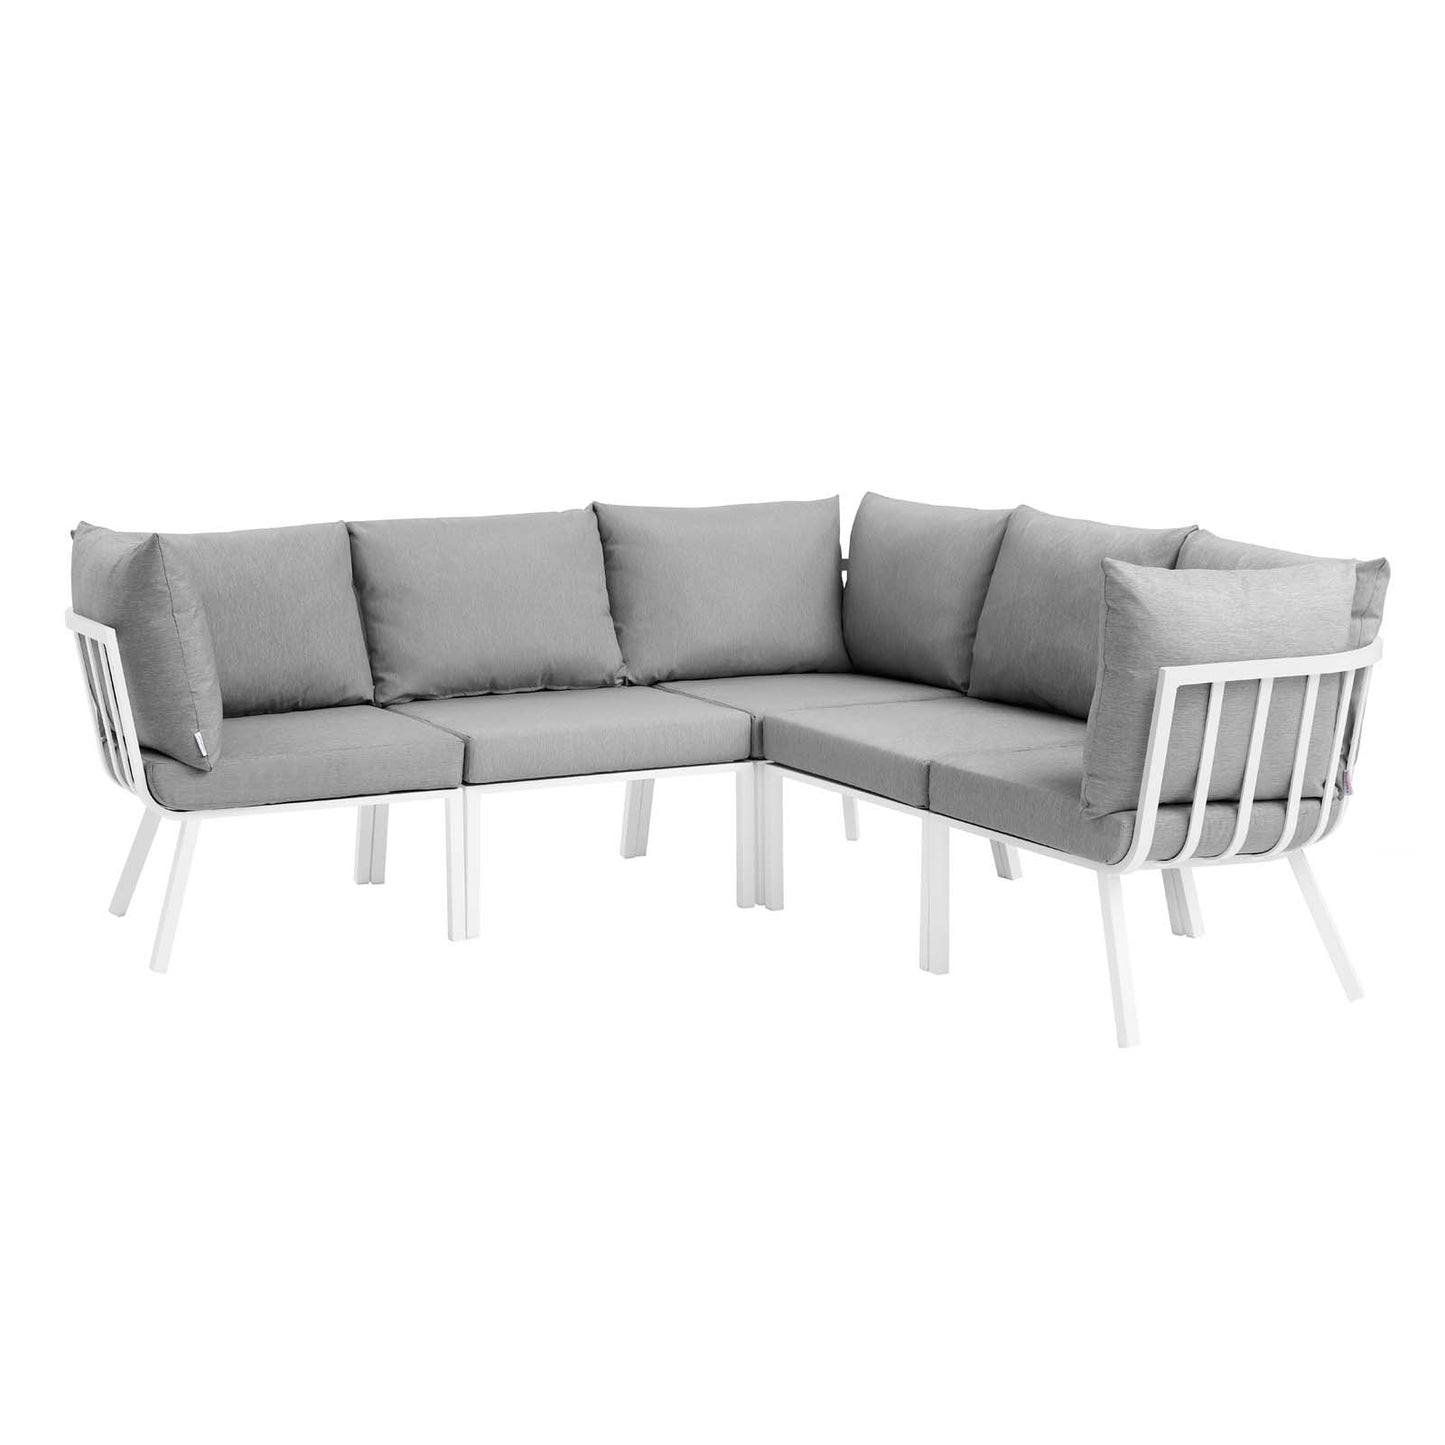 Riverside 5 Piece Outdoor Patio Aluminum Sectional White Gray EEI-3789-WHI-GRY